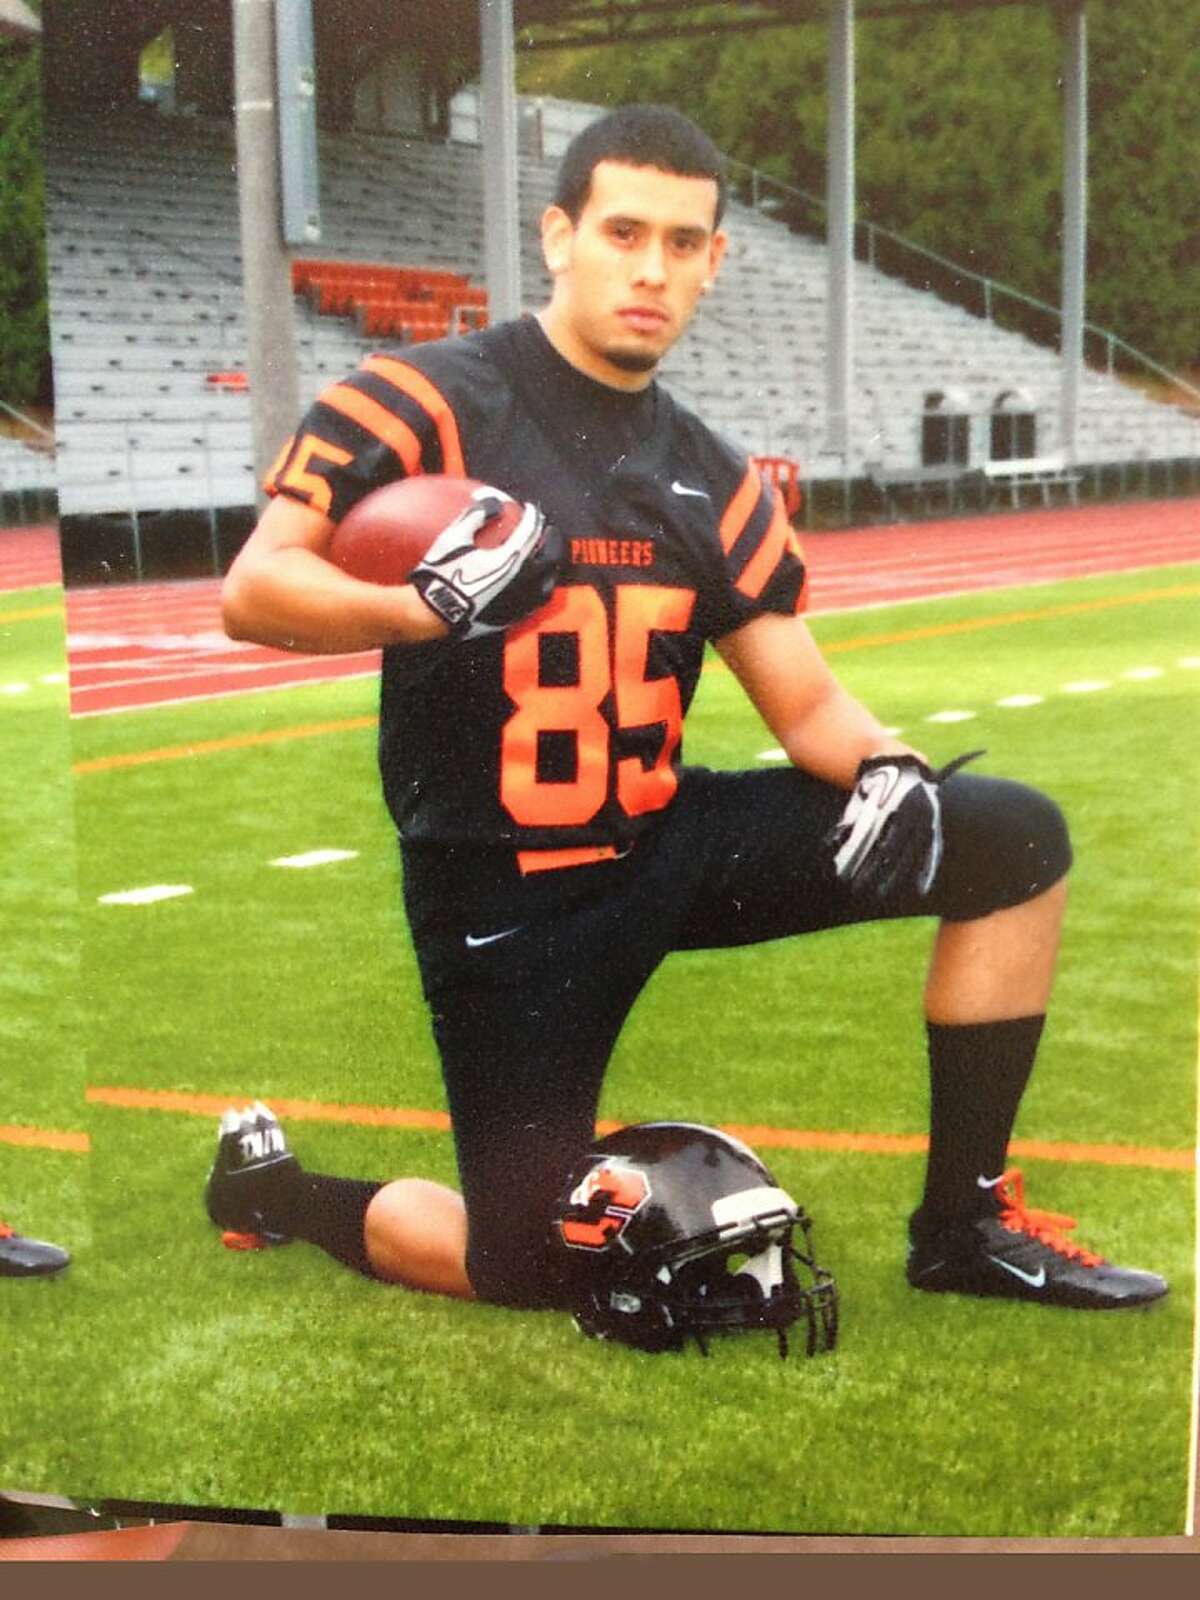 Jacob Valdiviezo, 19, who was shot and killed in front of his Mission District home early Saturday, is shown here in his Lewis and Clark football uniform. He played wide receiver and was a sophomore at the college in Portland, Ore.